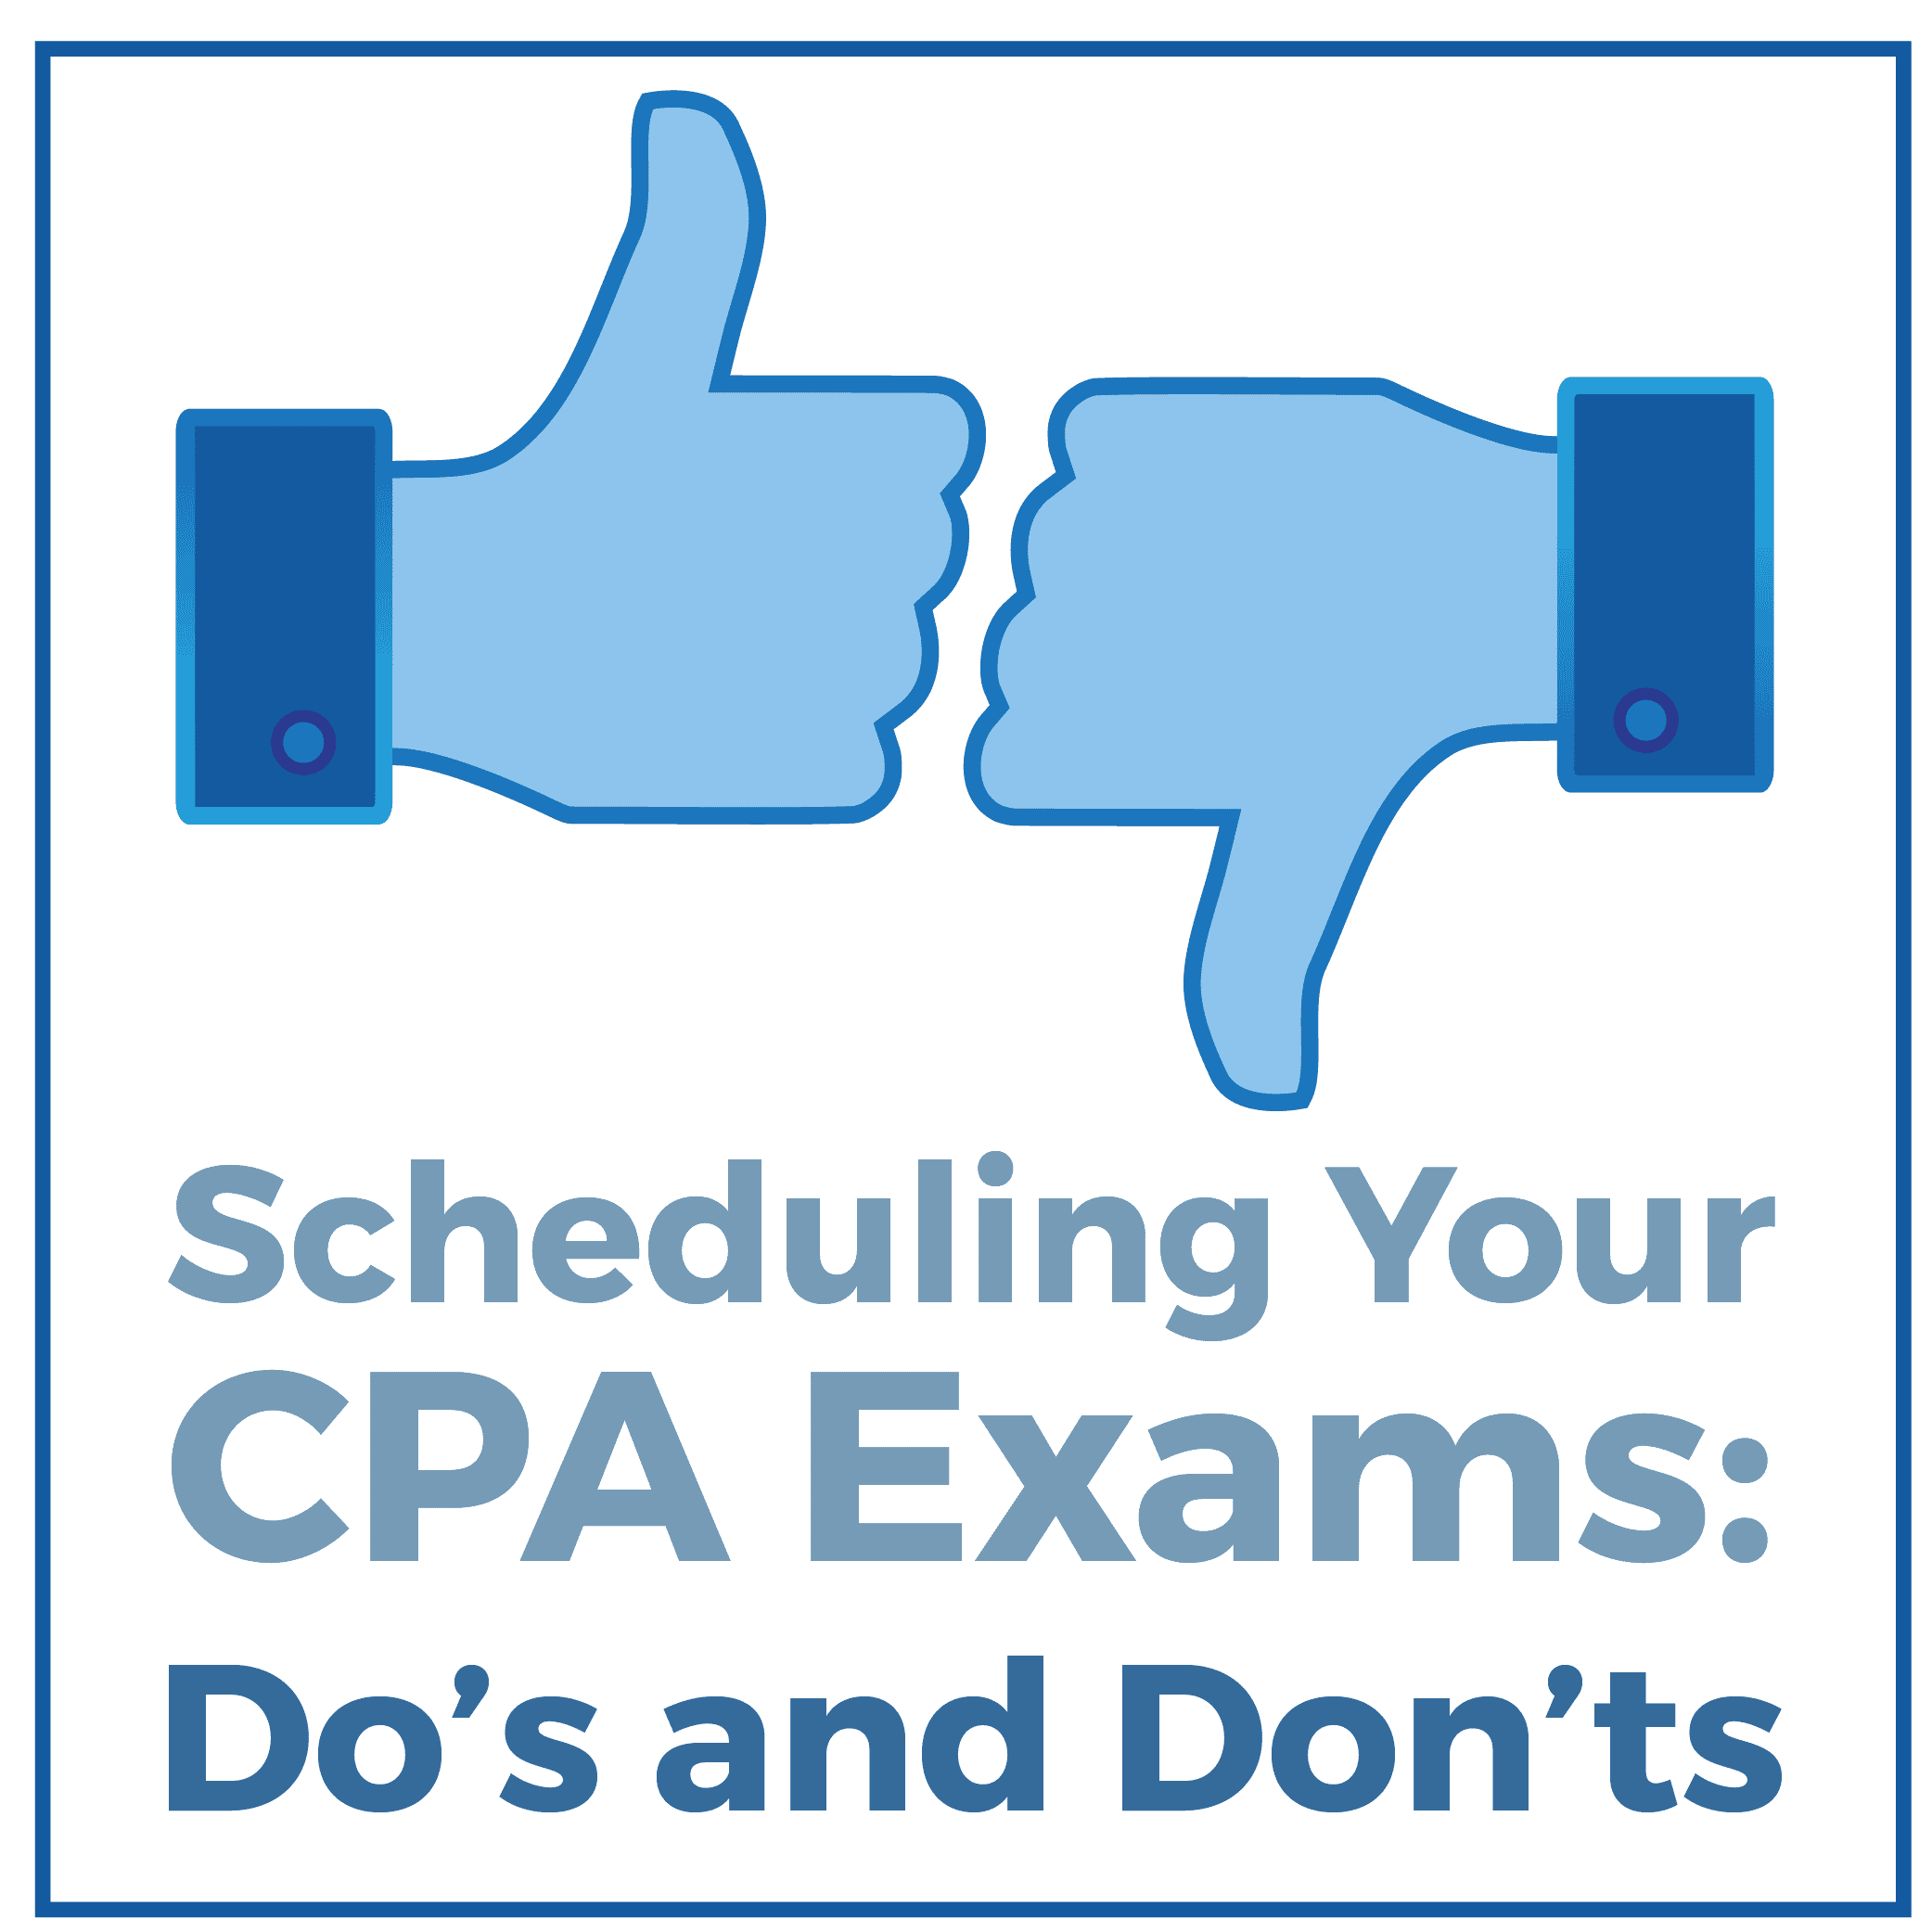 Scheduling Your CPA Exams: Do's and Don'ts